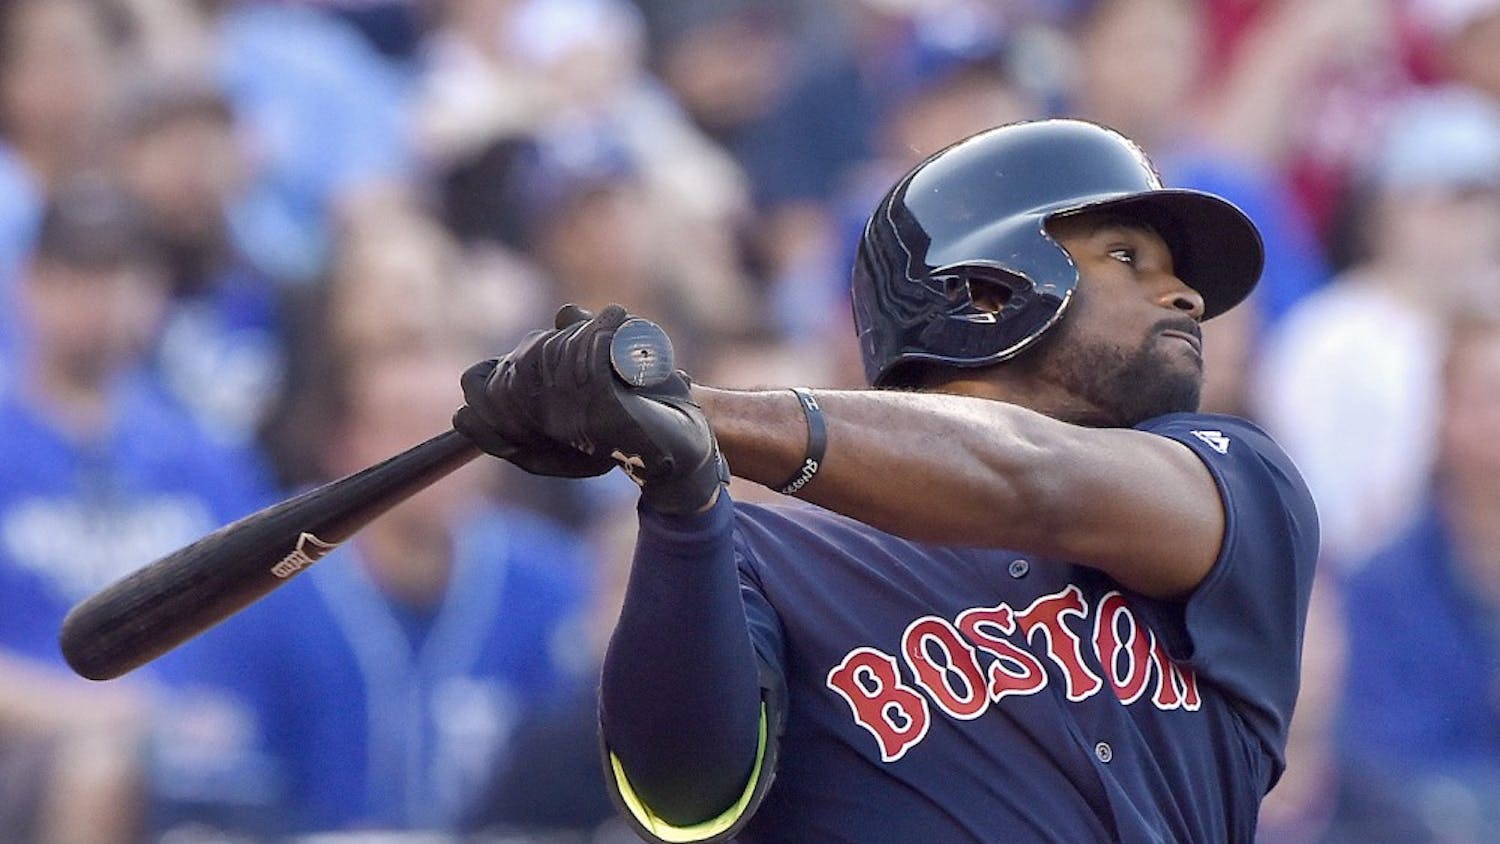 The Boston Red Sox&apos;s Jackie Bradley Jr. follows through on a solo home run in the second inning against the Kansas City Royals in the second game of a doubleheader on Wednesday, May 18, 2016, at Kauffman Stadium in Kansas City, Mo. (John Sleezer/Kansas City Star/TNS)